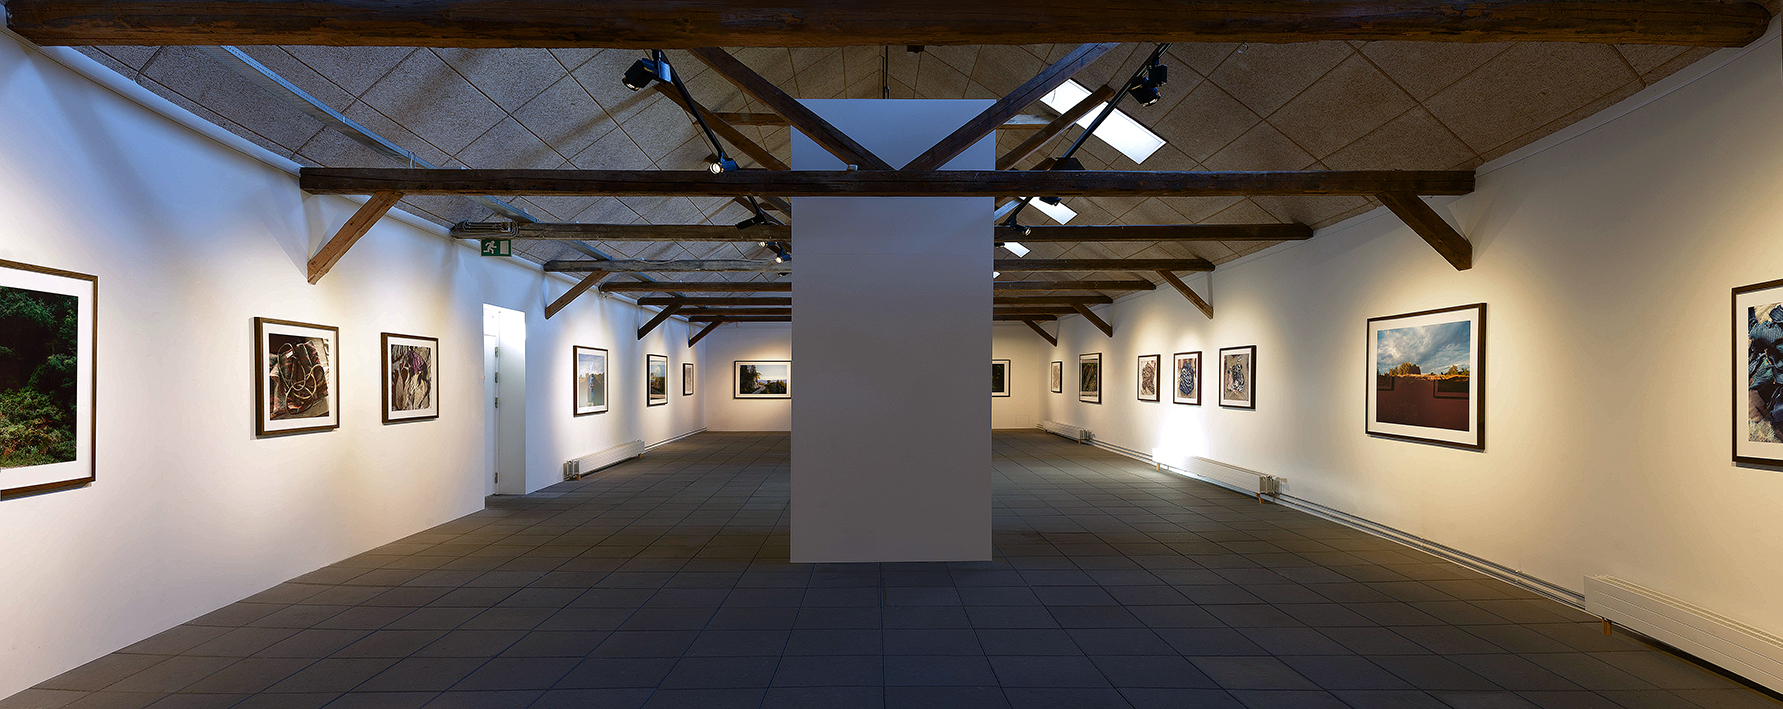 Installation view from the solo exhibition Negatives Beyond the Green, Kunstpakhuset, 2015, Ikast (DK).